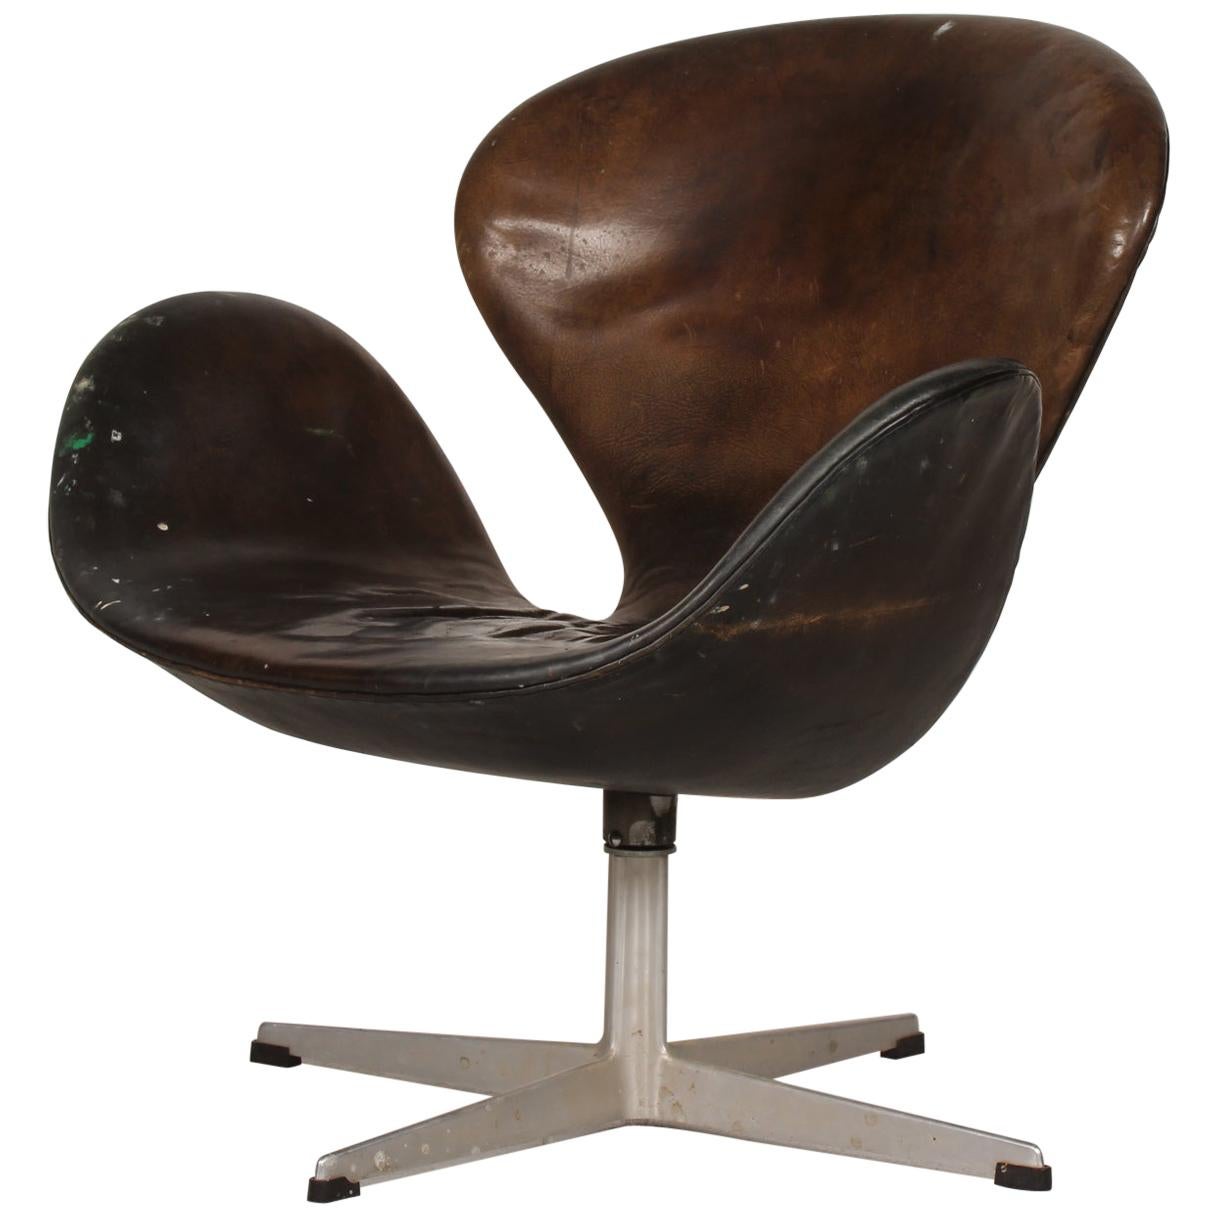 Original 1960s Arne Jacobsen Black Leather Swan Chair 3320 with Heavy Patina